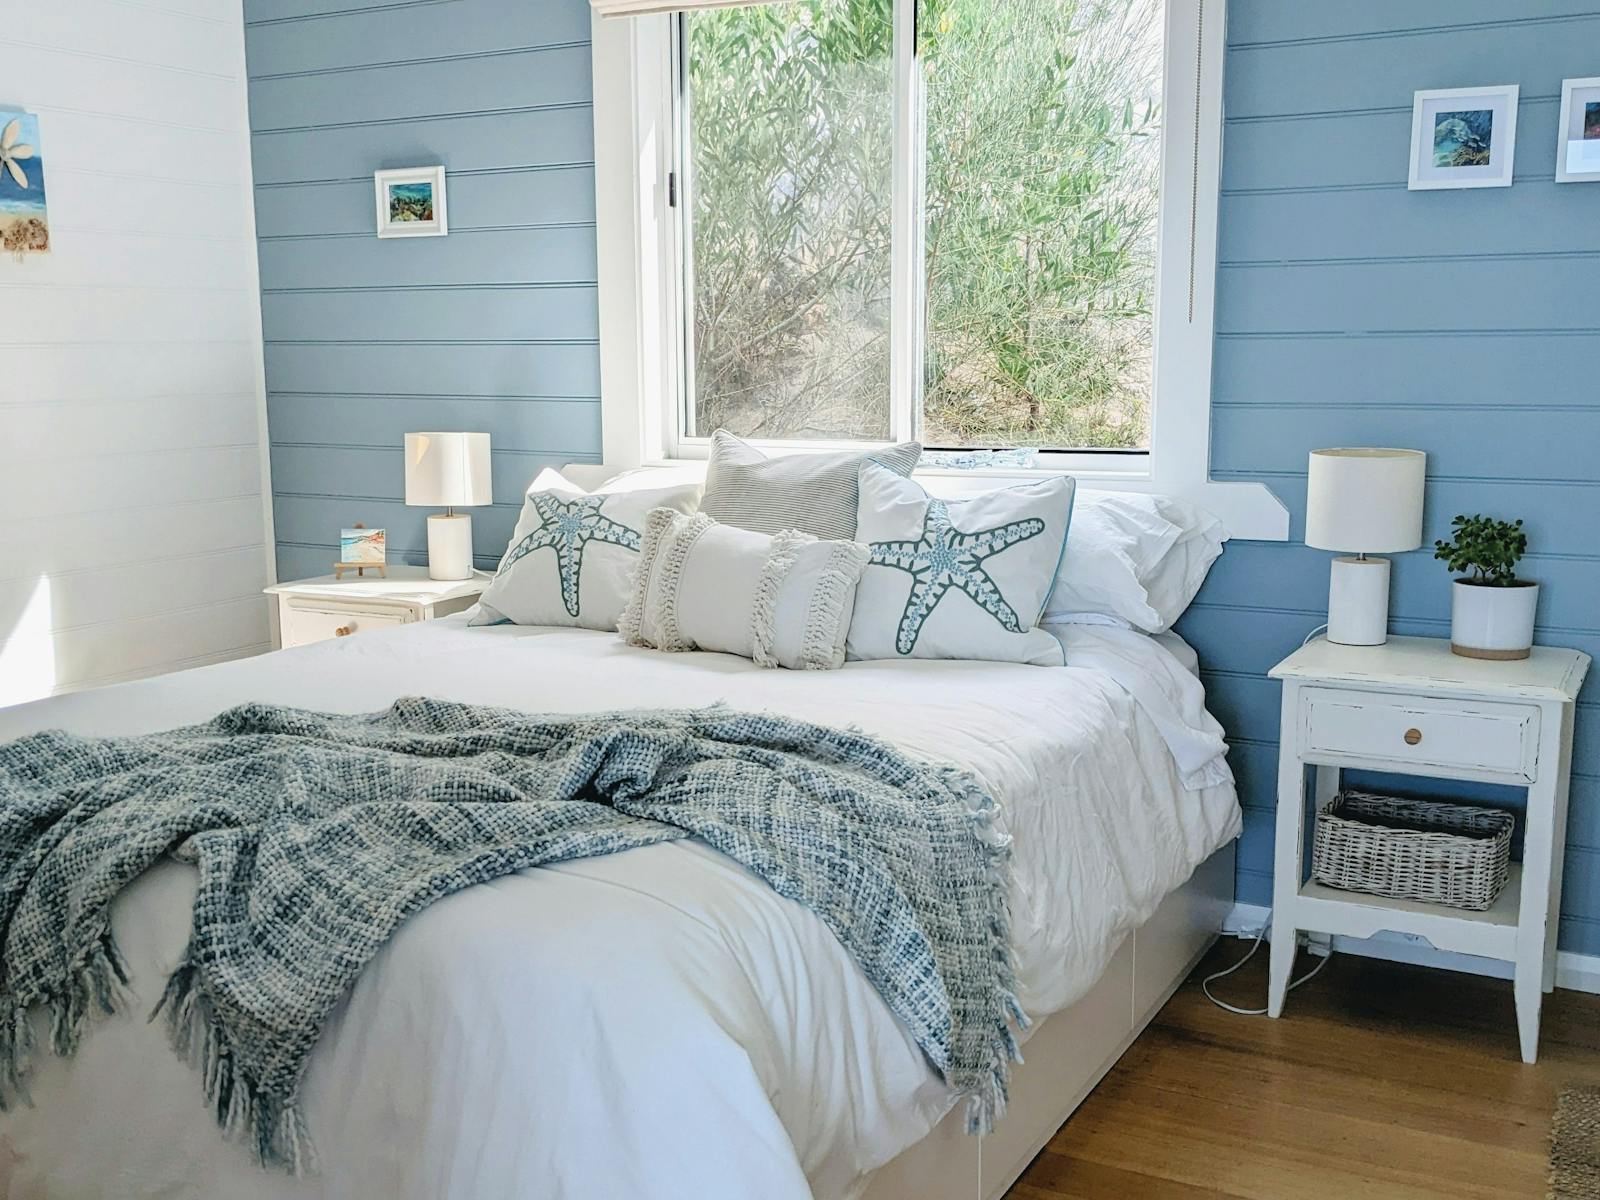 A queen-size bed in a seaside themed bedroom with blue wall, white doona, side tables and throw